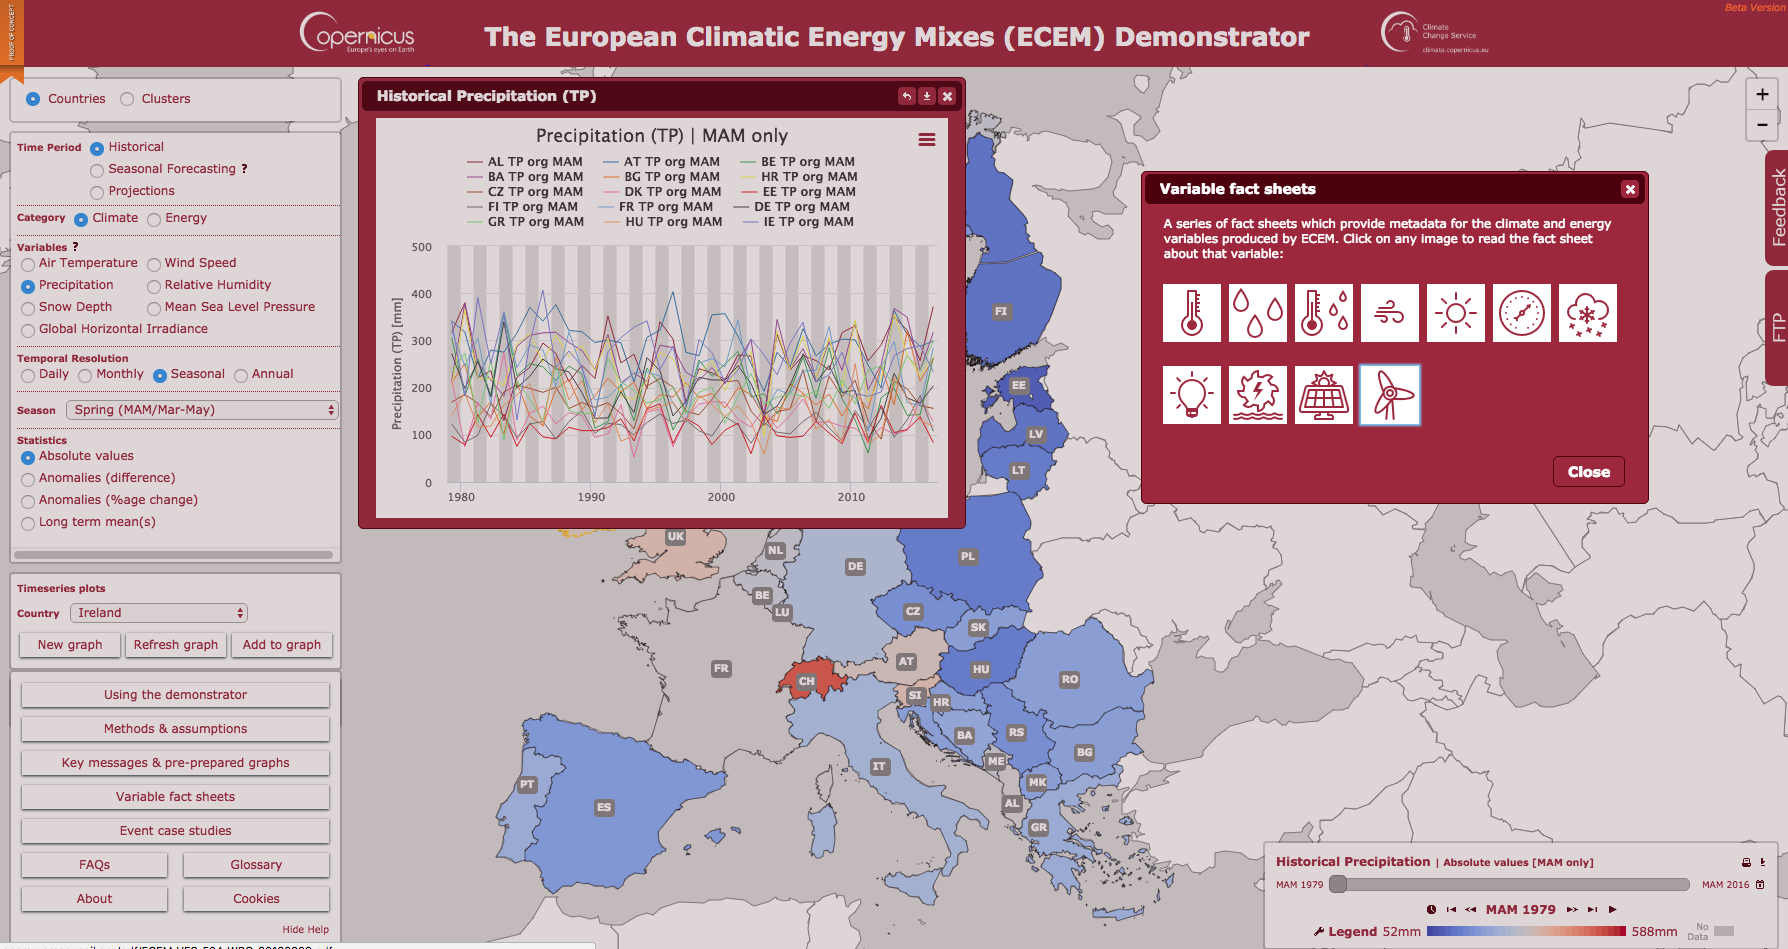 Climate and energy: European Climatic Energy Mixes